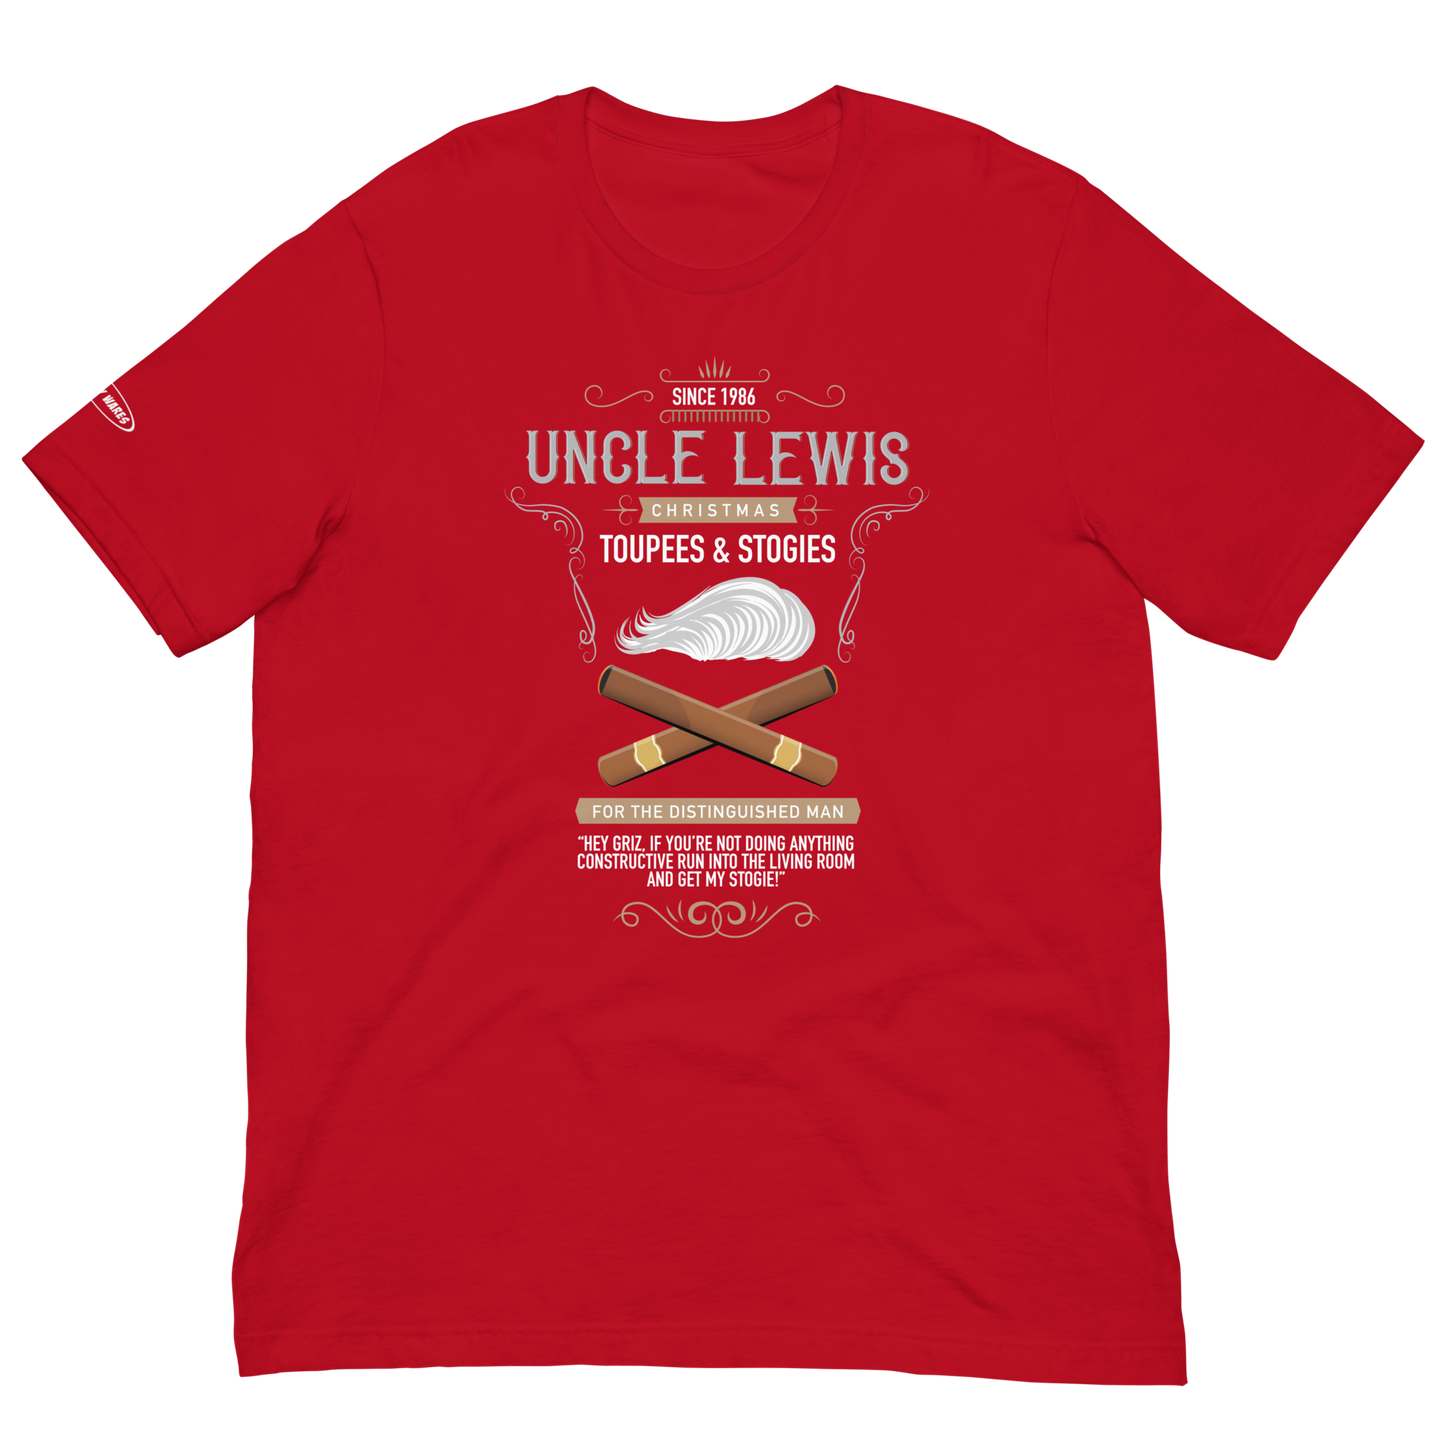 CHRISTMAS - Griswold Uncle Lewis Toupees and Stogies - Funny t-shirt